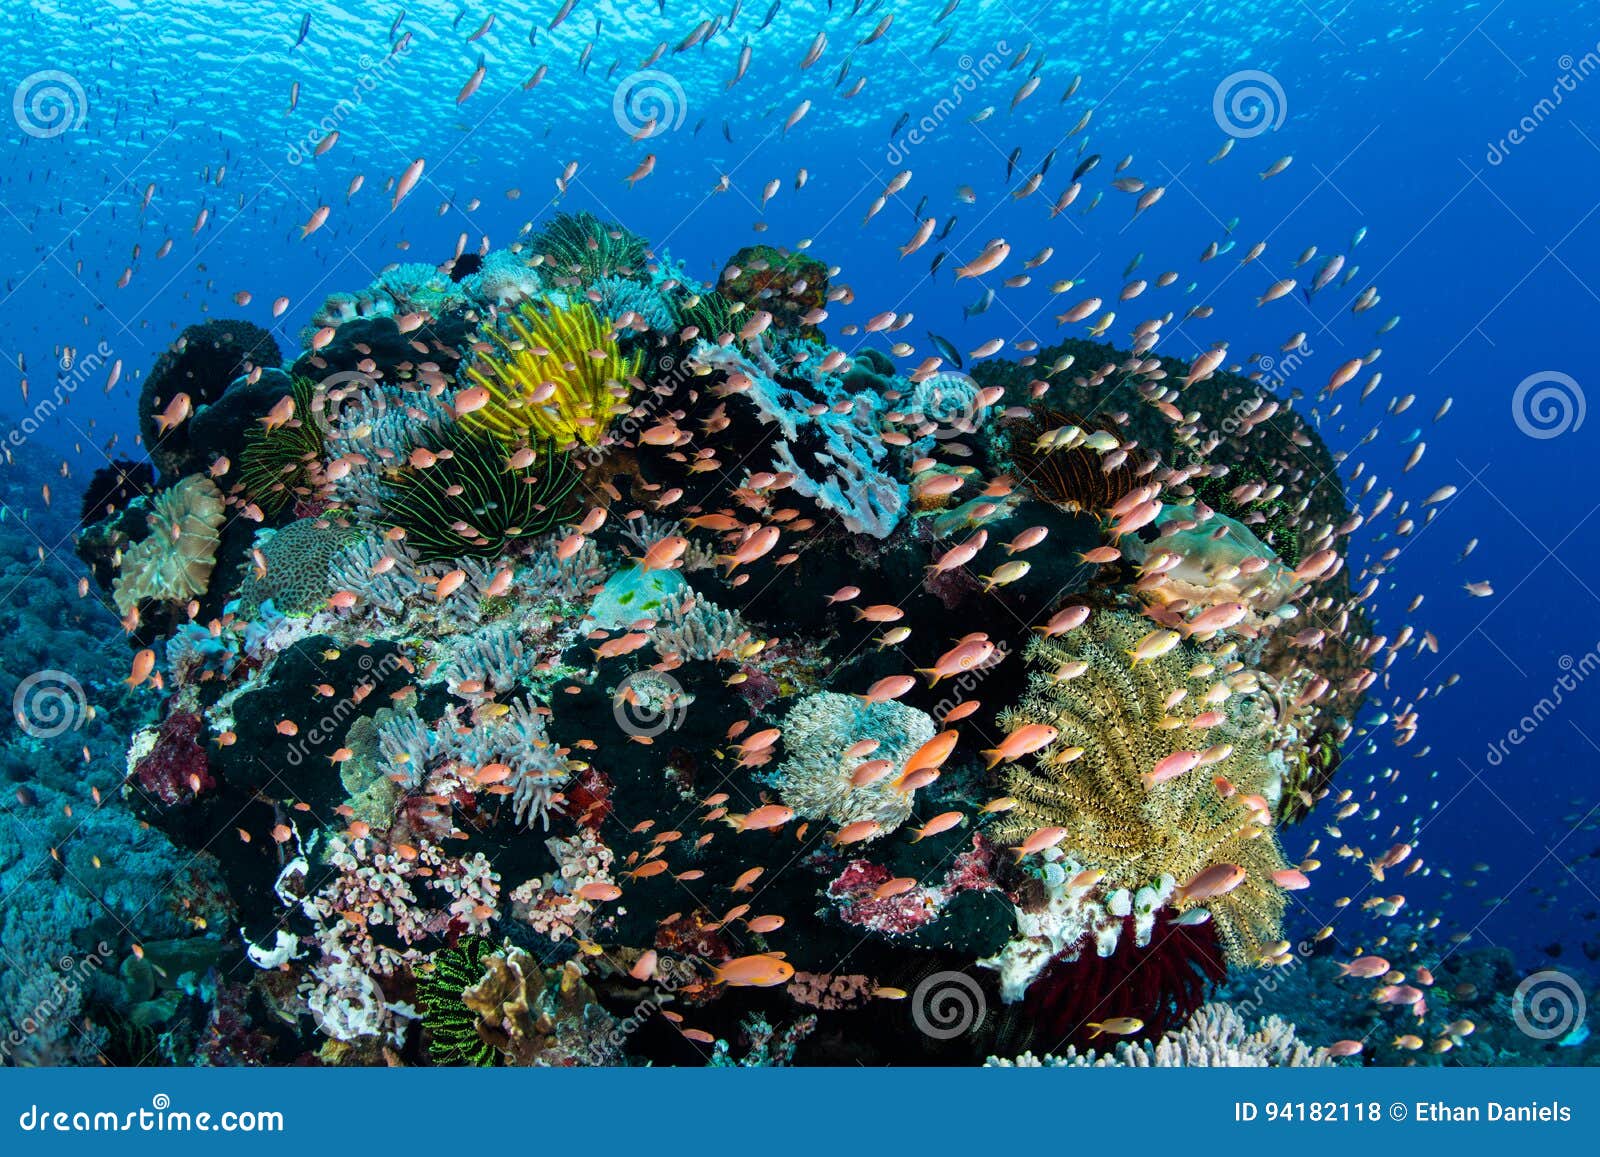 colorful fish and vibrant reef in alor